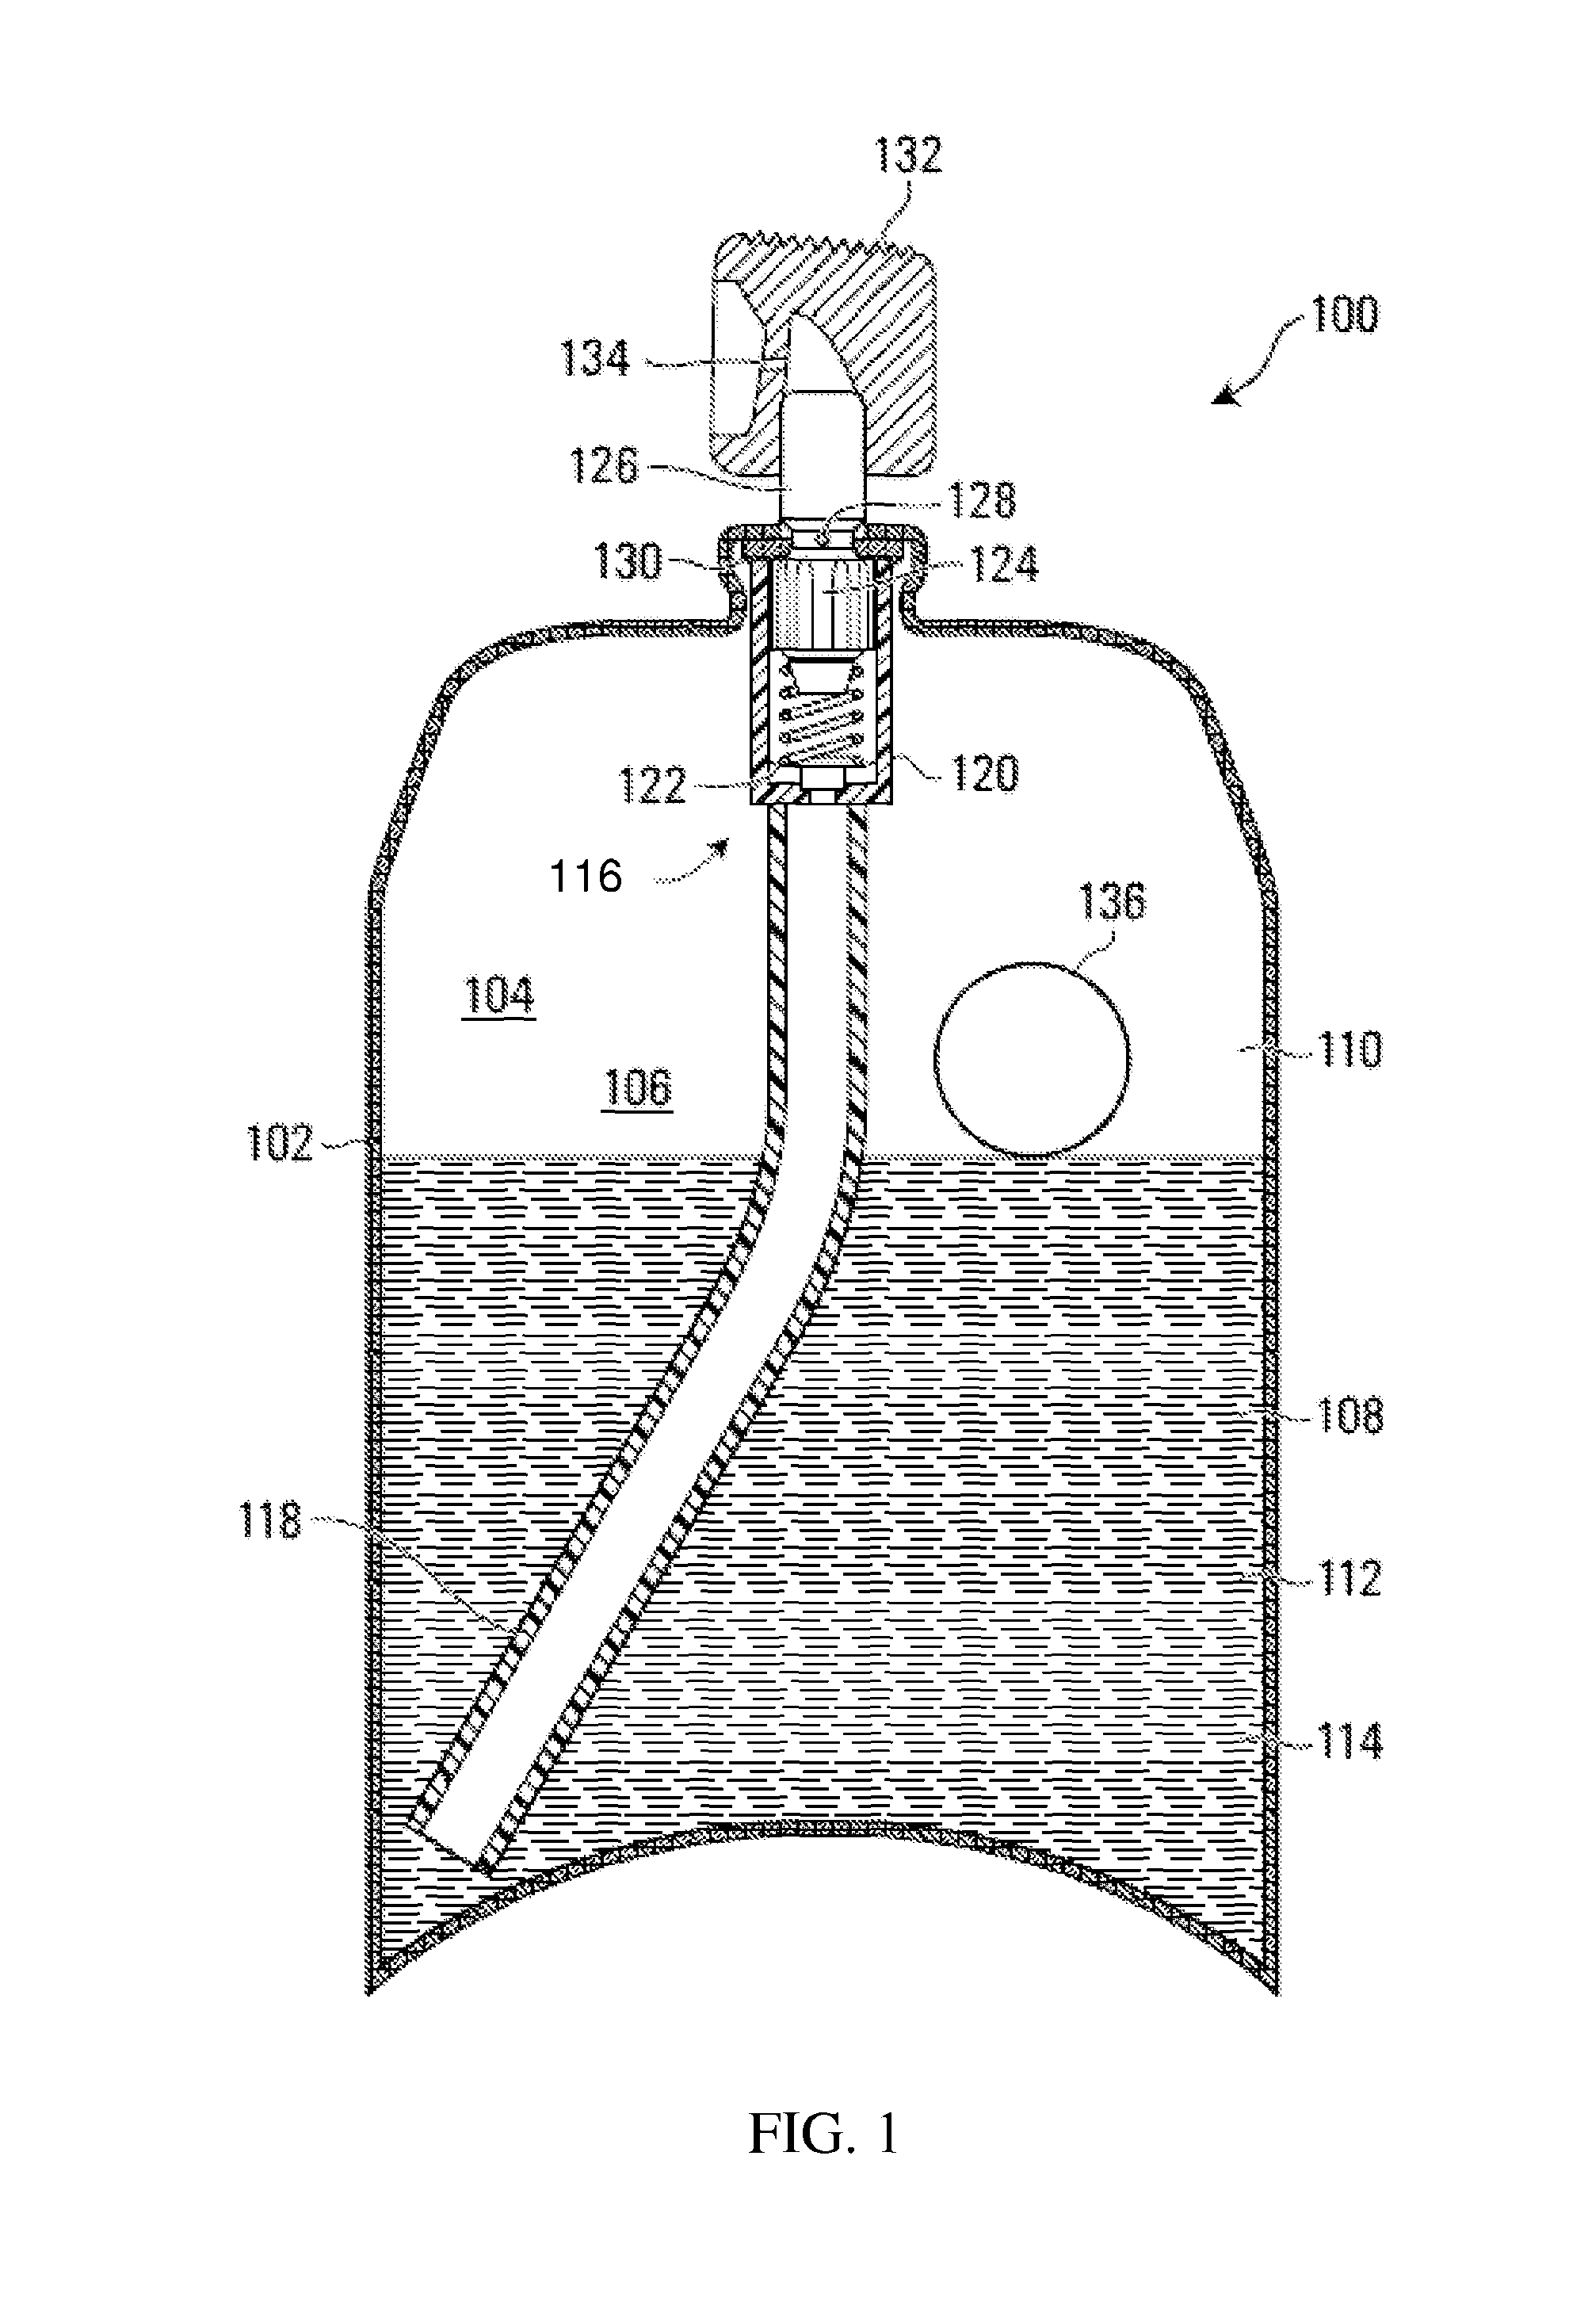 Spray apparatuses, uses of diatomaceous earth, and methods of controlling insect populations